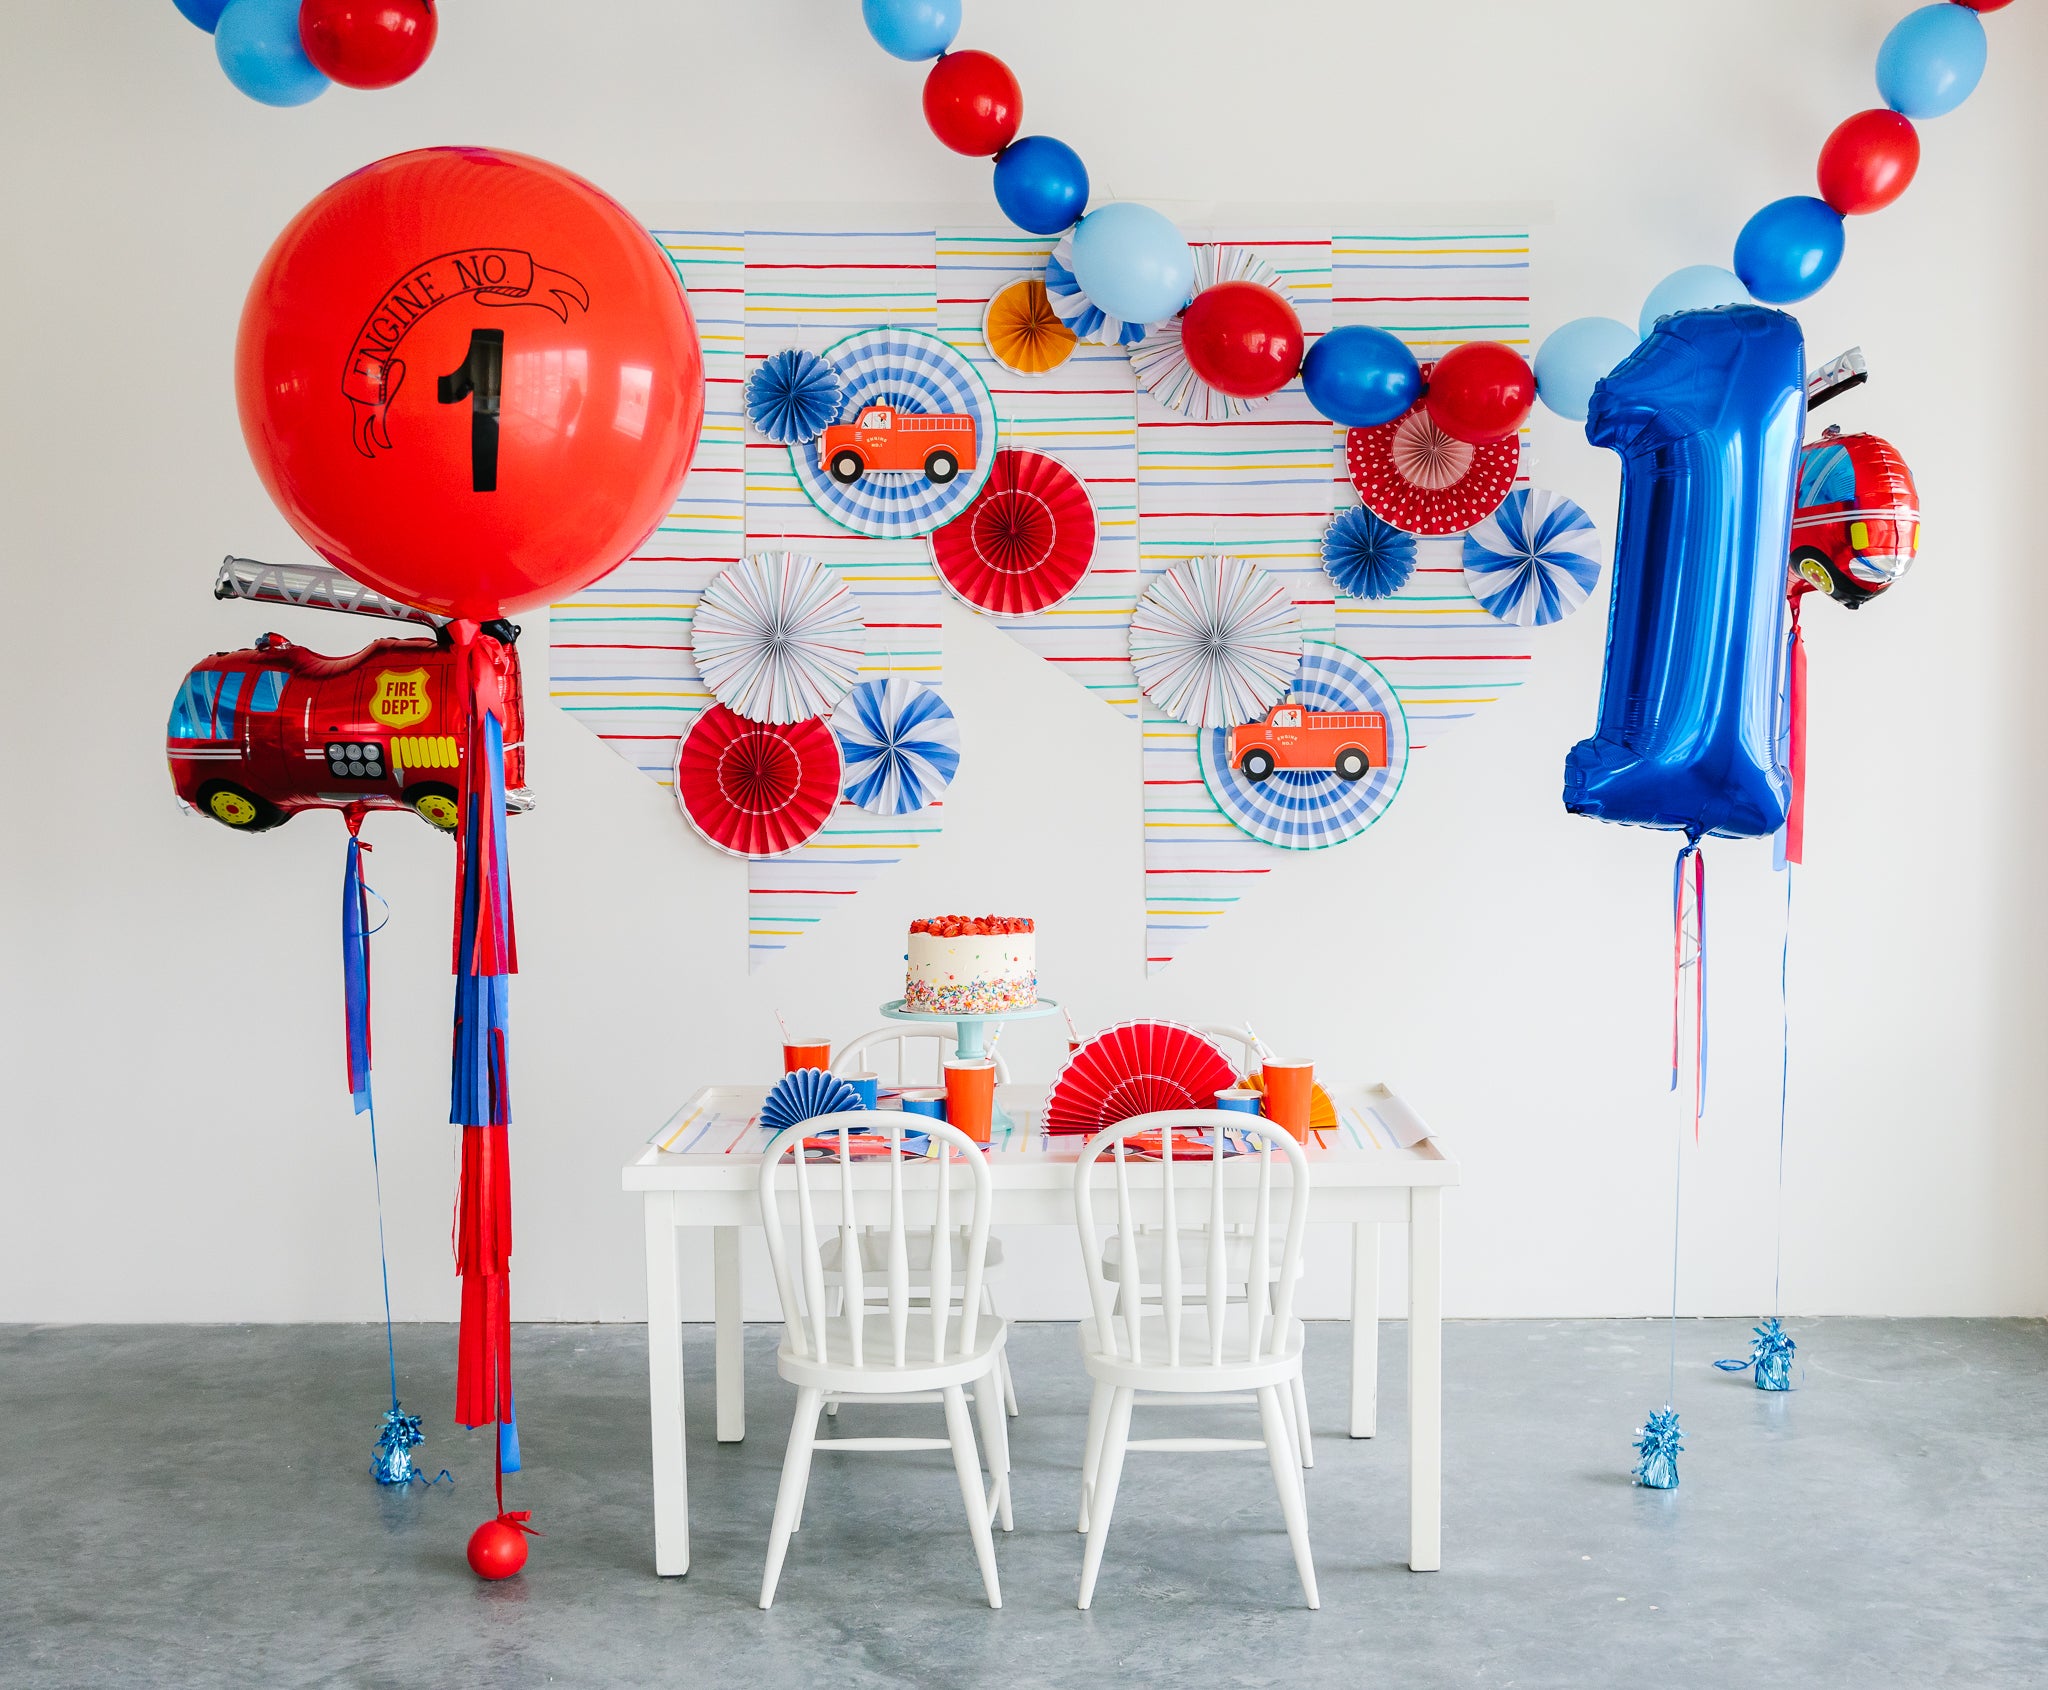 Fire truck themed birthday party supplies and decorations for boys